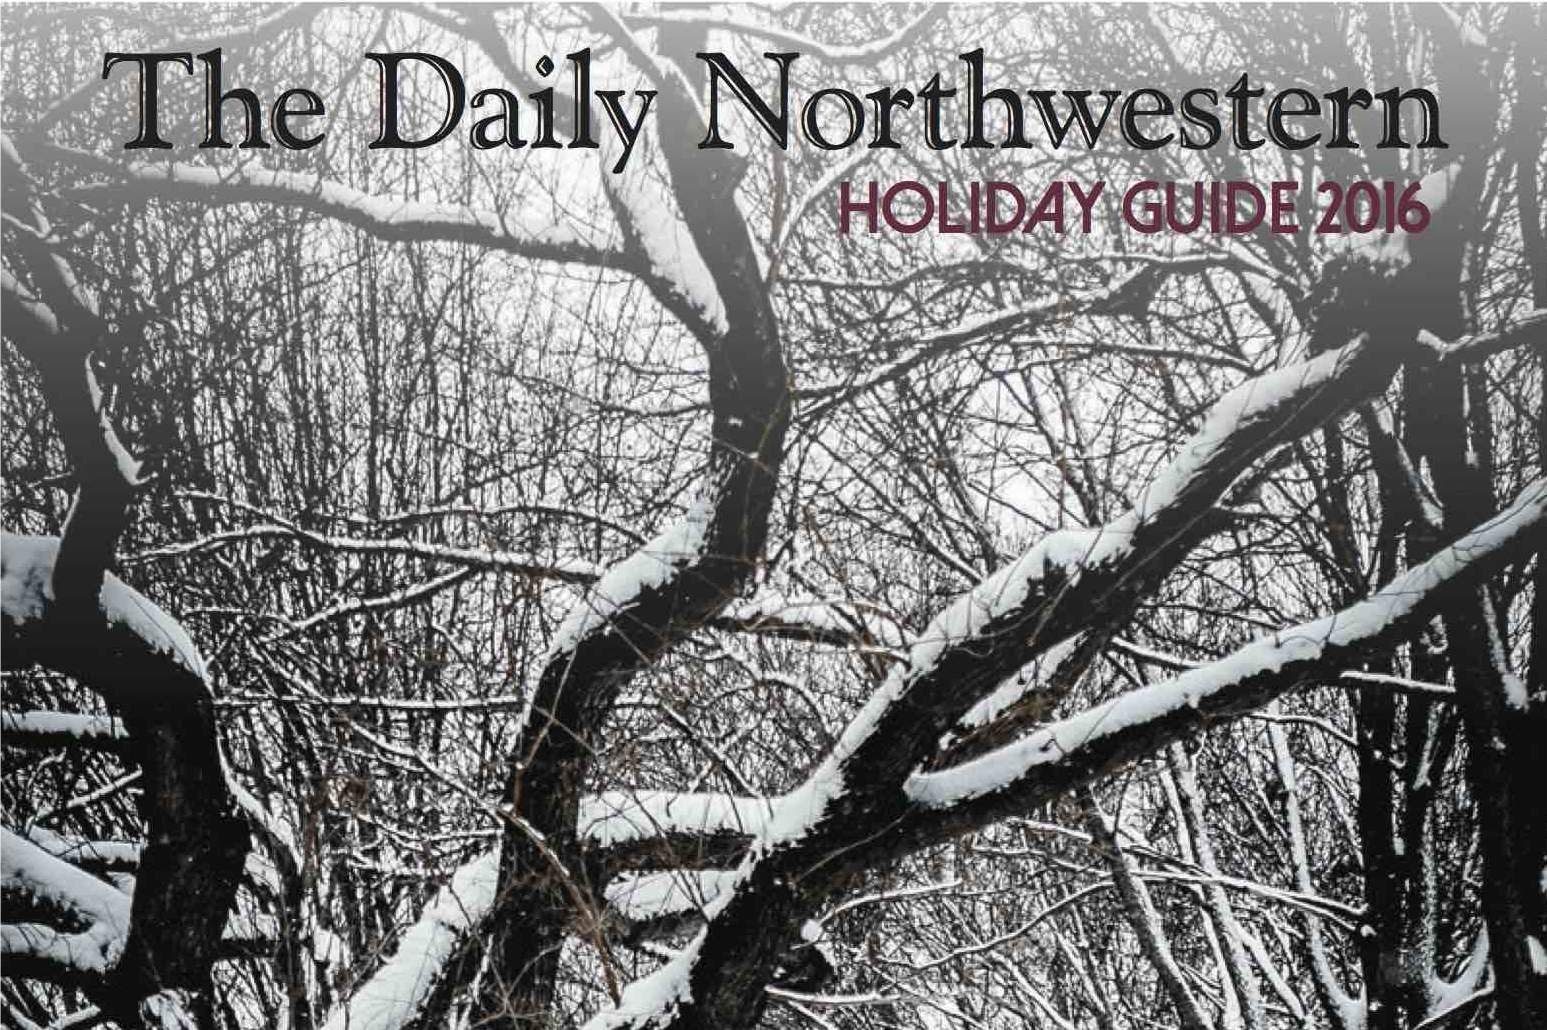 The+Daily+Northwestern+presents%3A+Holiday+Guide+2016